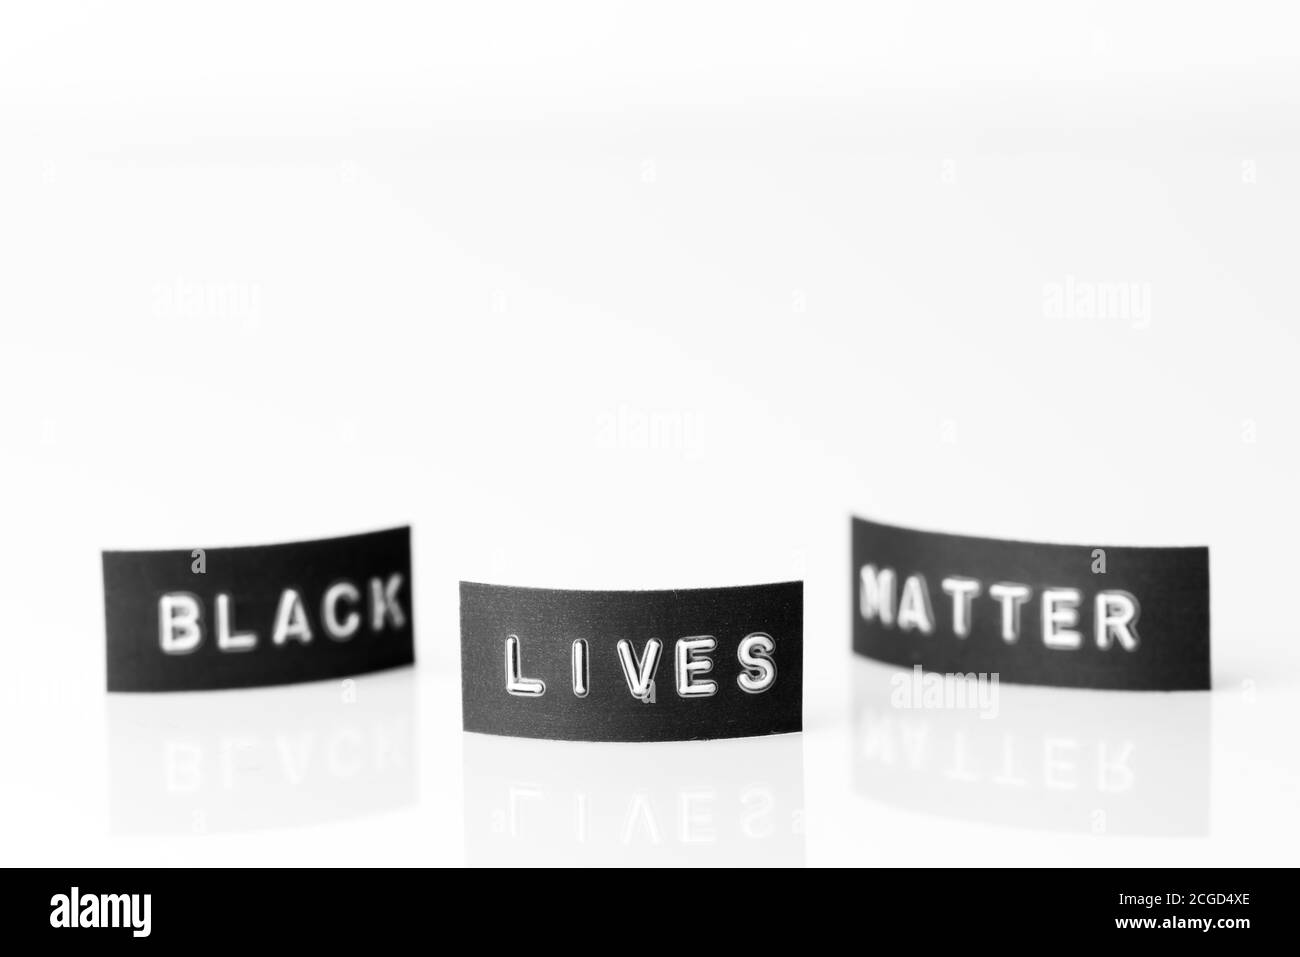 Slogan 'Black lives matter' written on small labels standing on white reflective plate Stock Photo